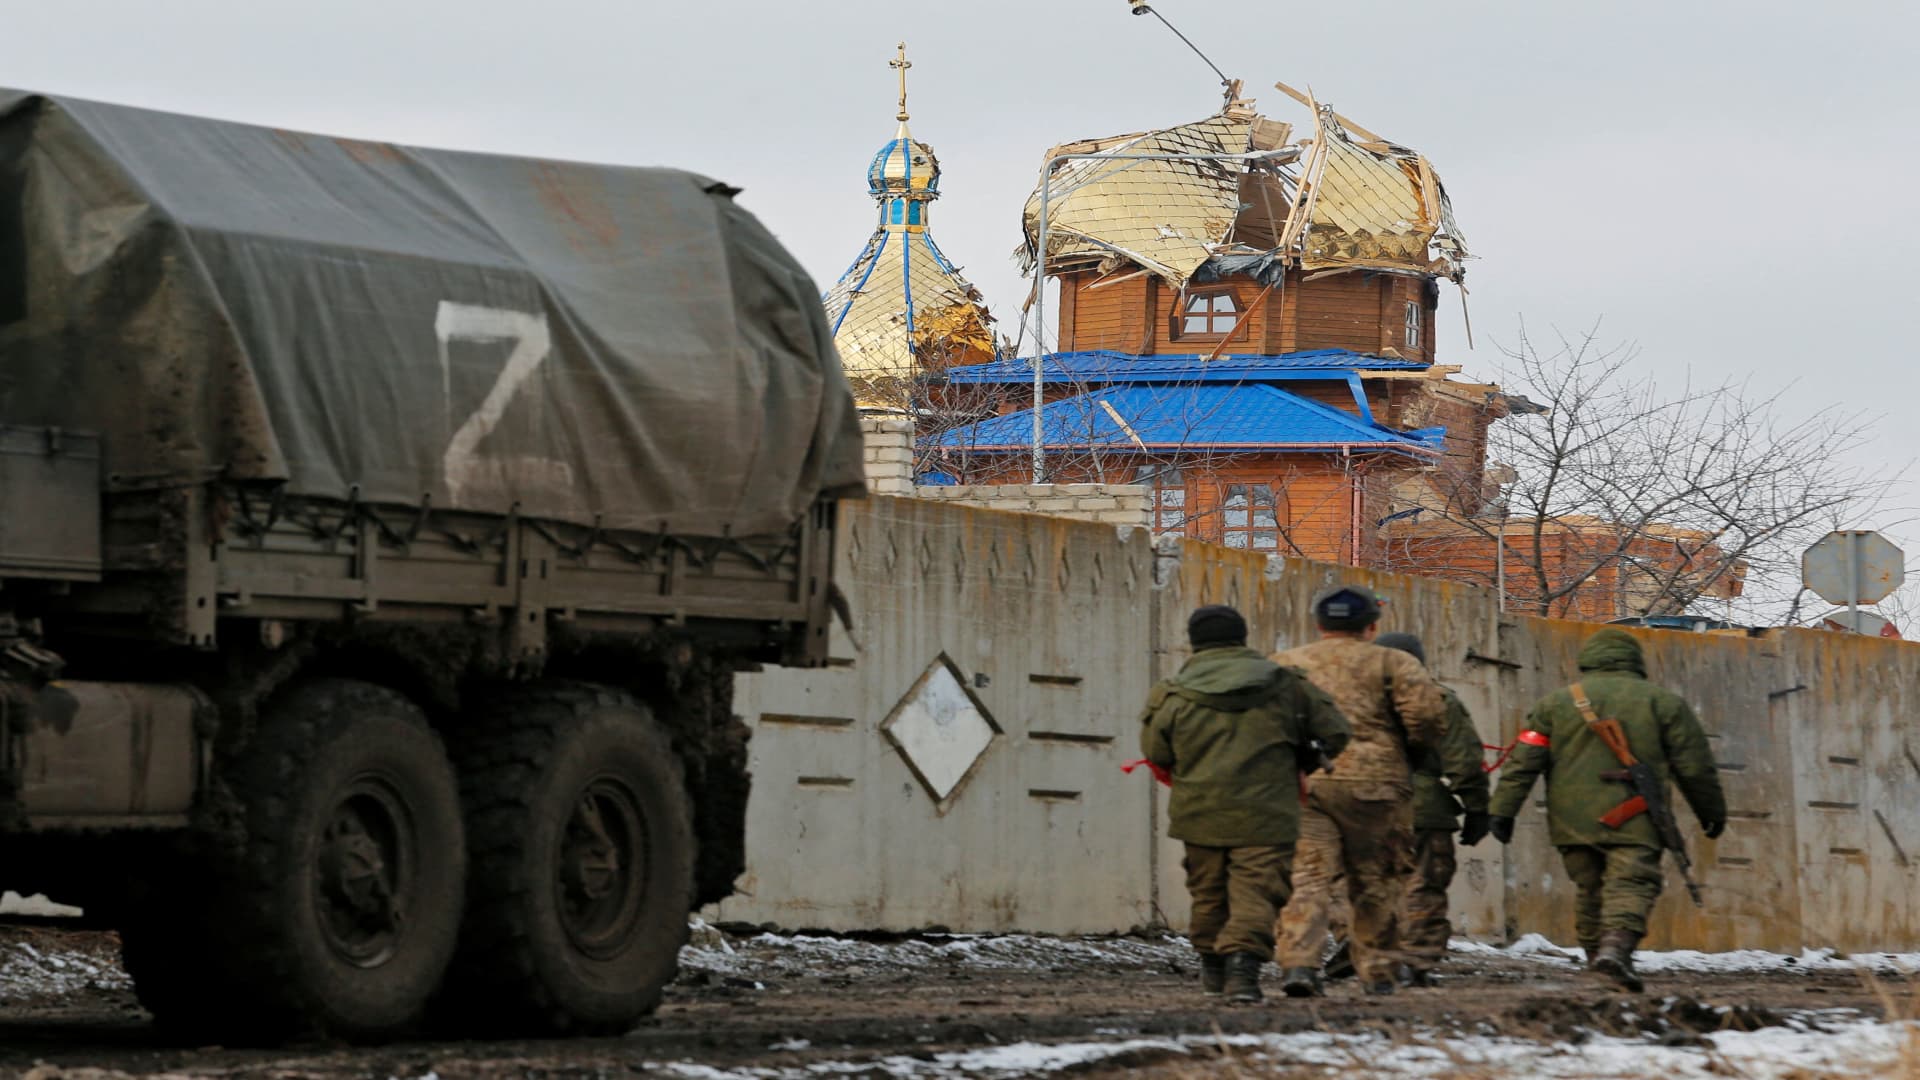 Service members of pro-Russian troops in uniforms without insignia walk near a church which was damaged during Ukraine-Russia conflict in the separatist-controlled town of Volnovakha in the Donetsk region, Ukraine March 11, 2022. 